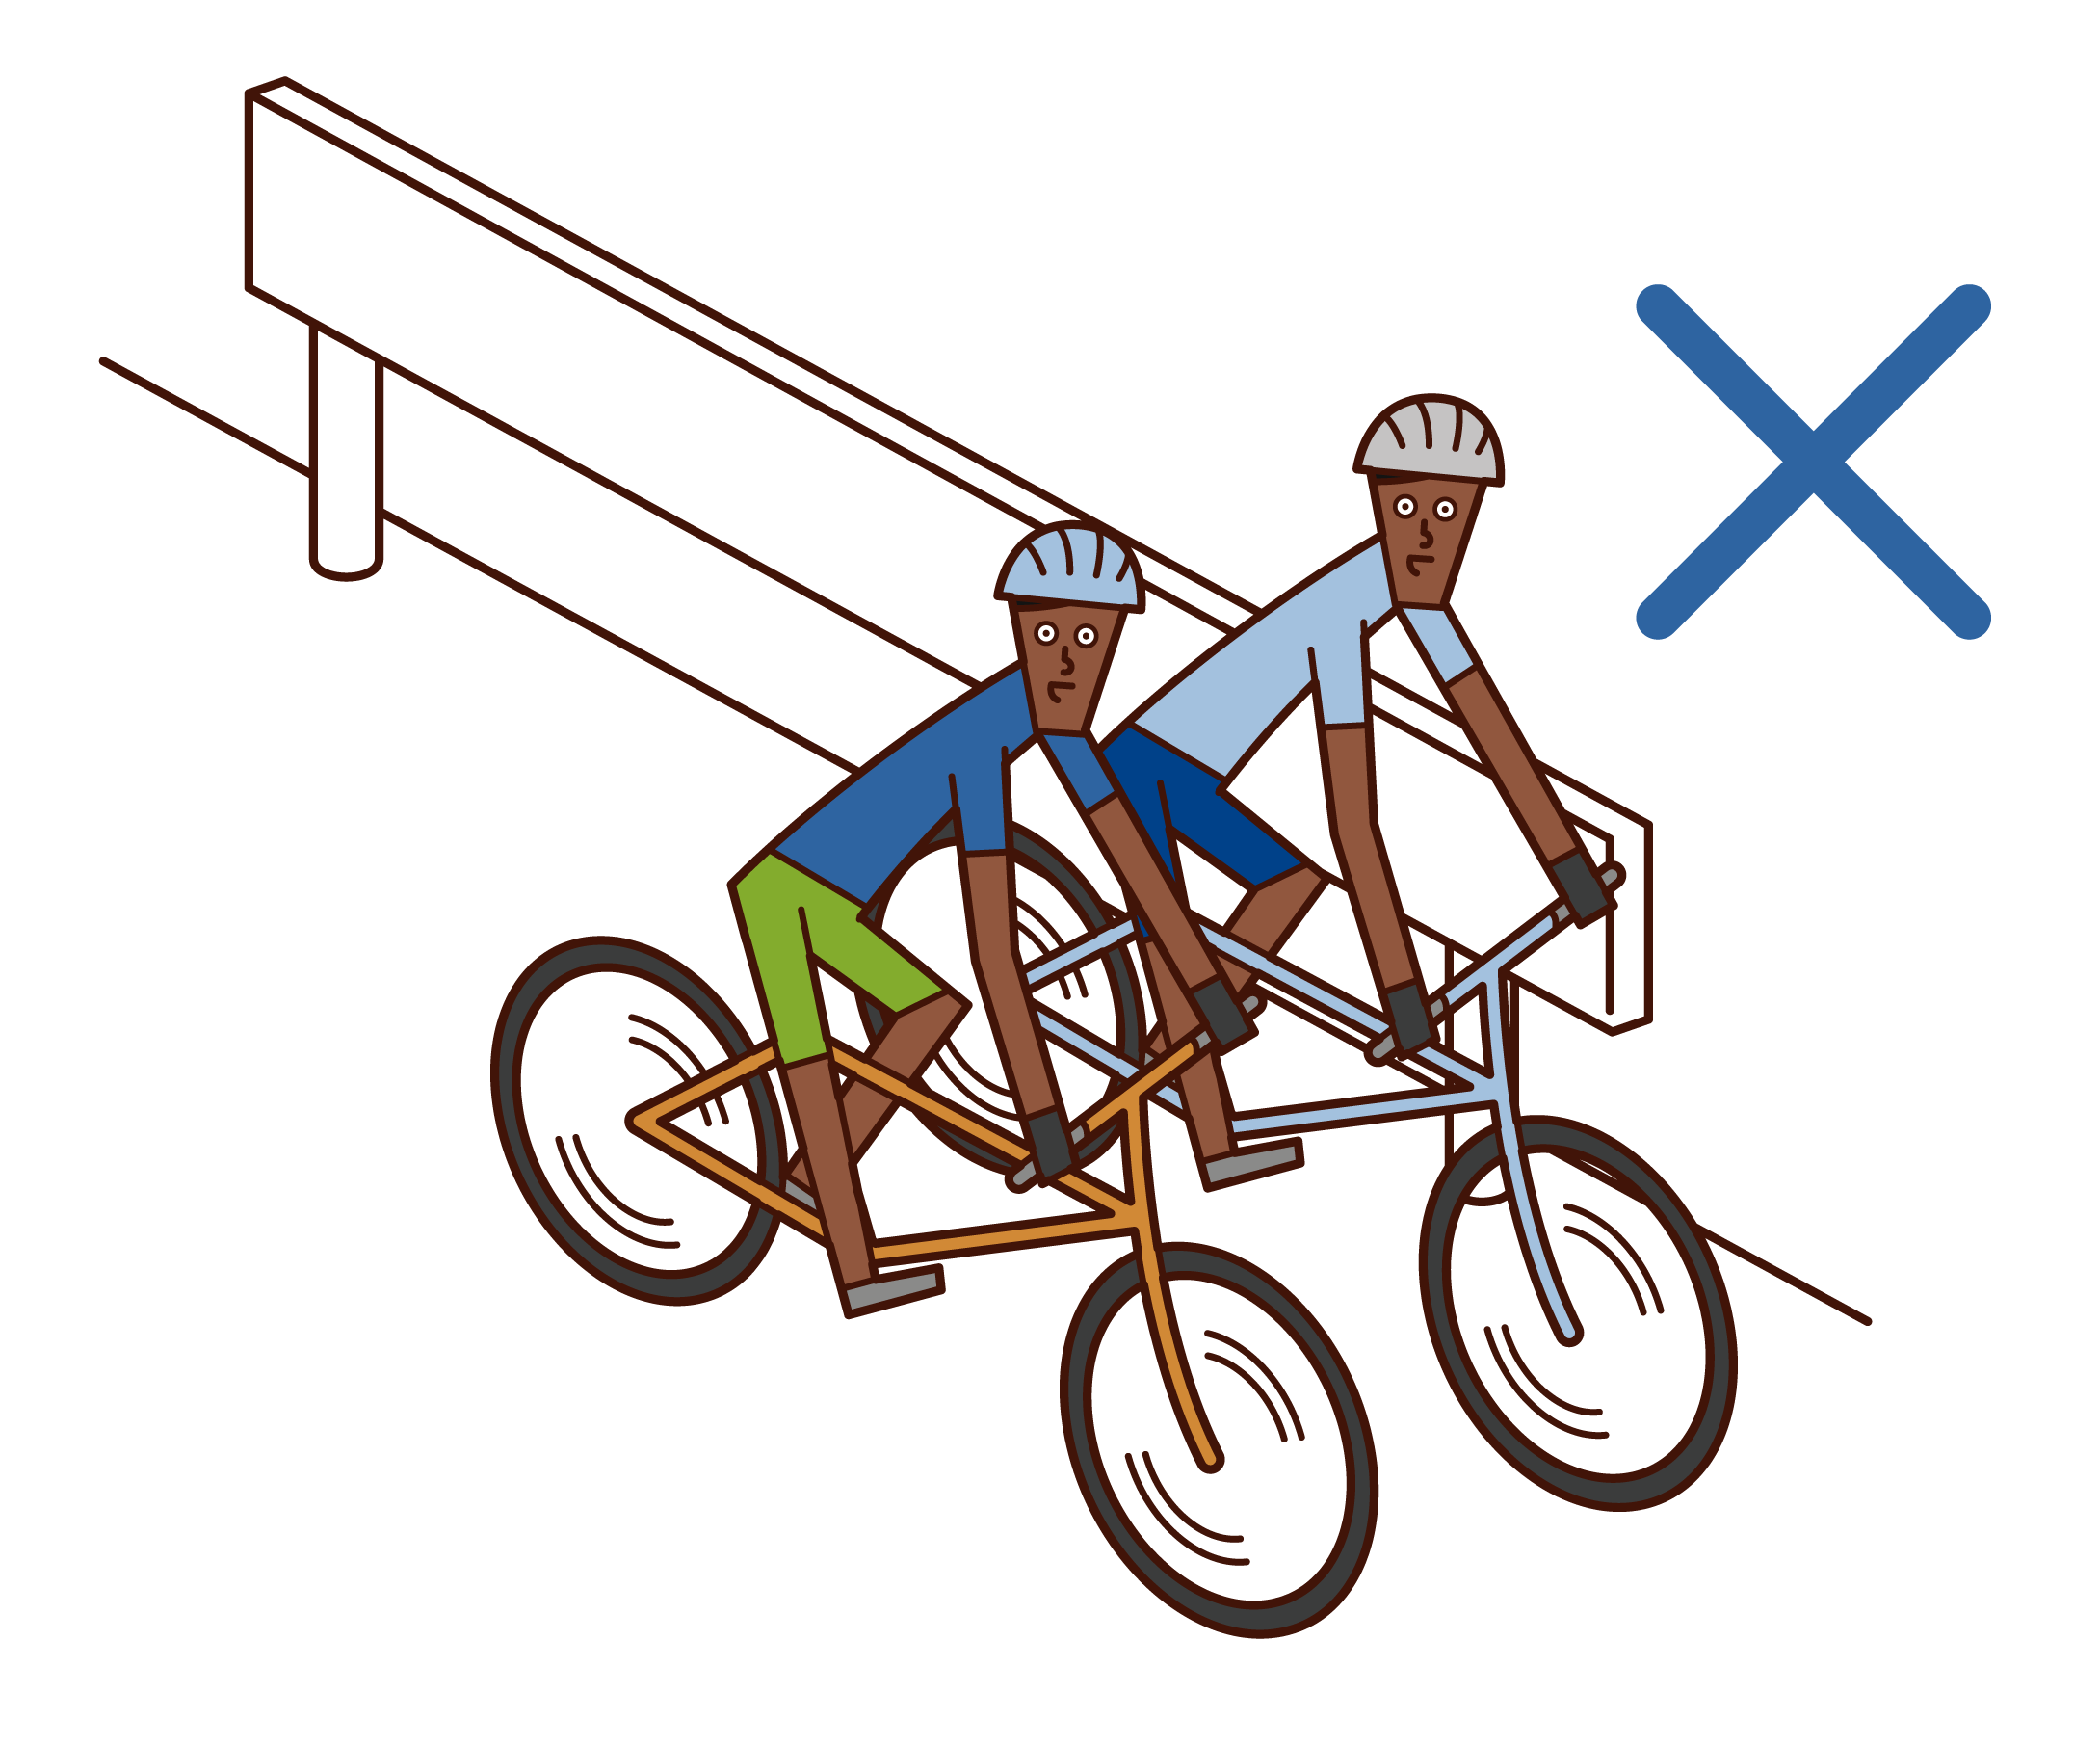 Illustration of people (men) running side by side on bicycles